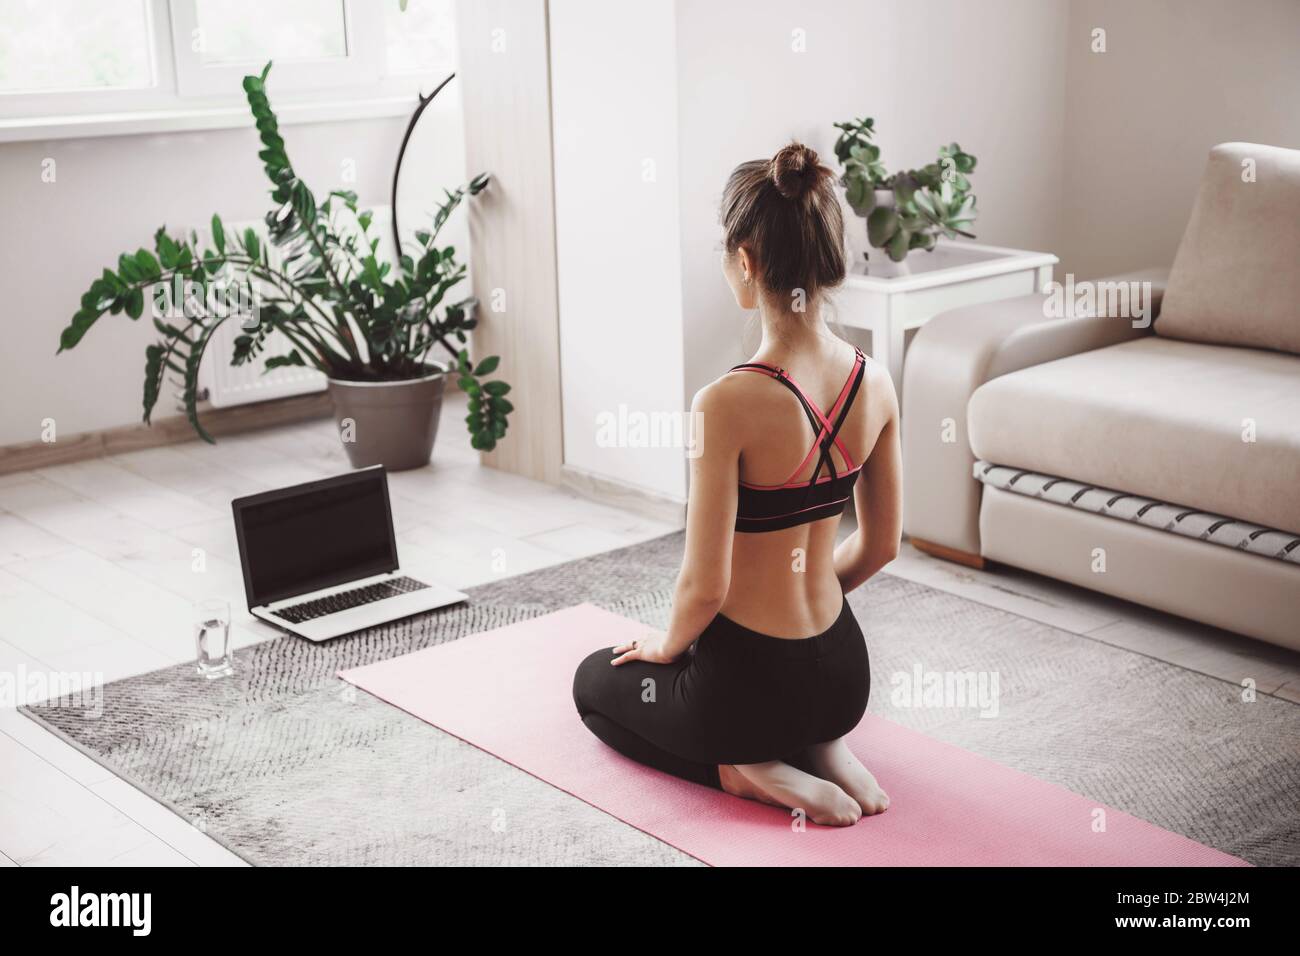 Caucasian woman sitting in front of the laptop and practice yoga at home dressed in sportswear on a pink sport carpet Stock Photo